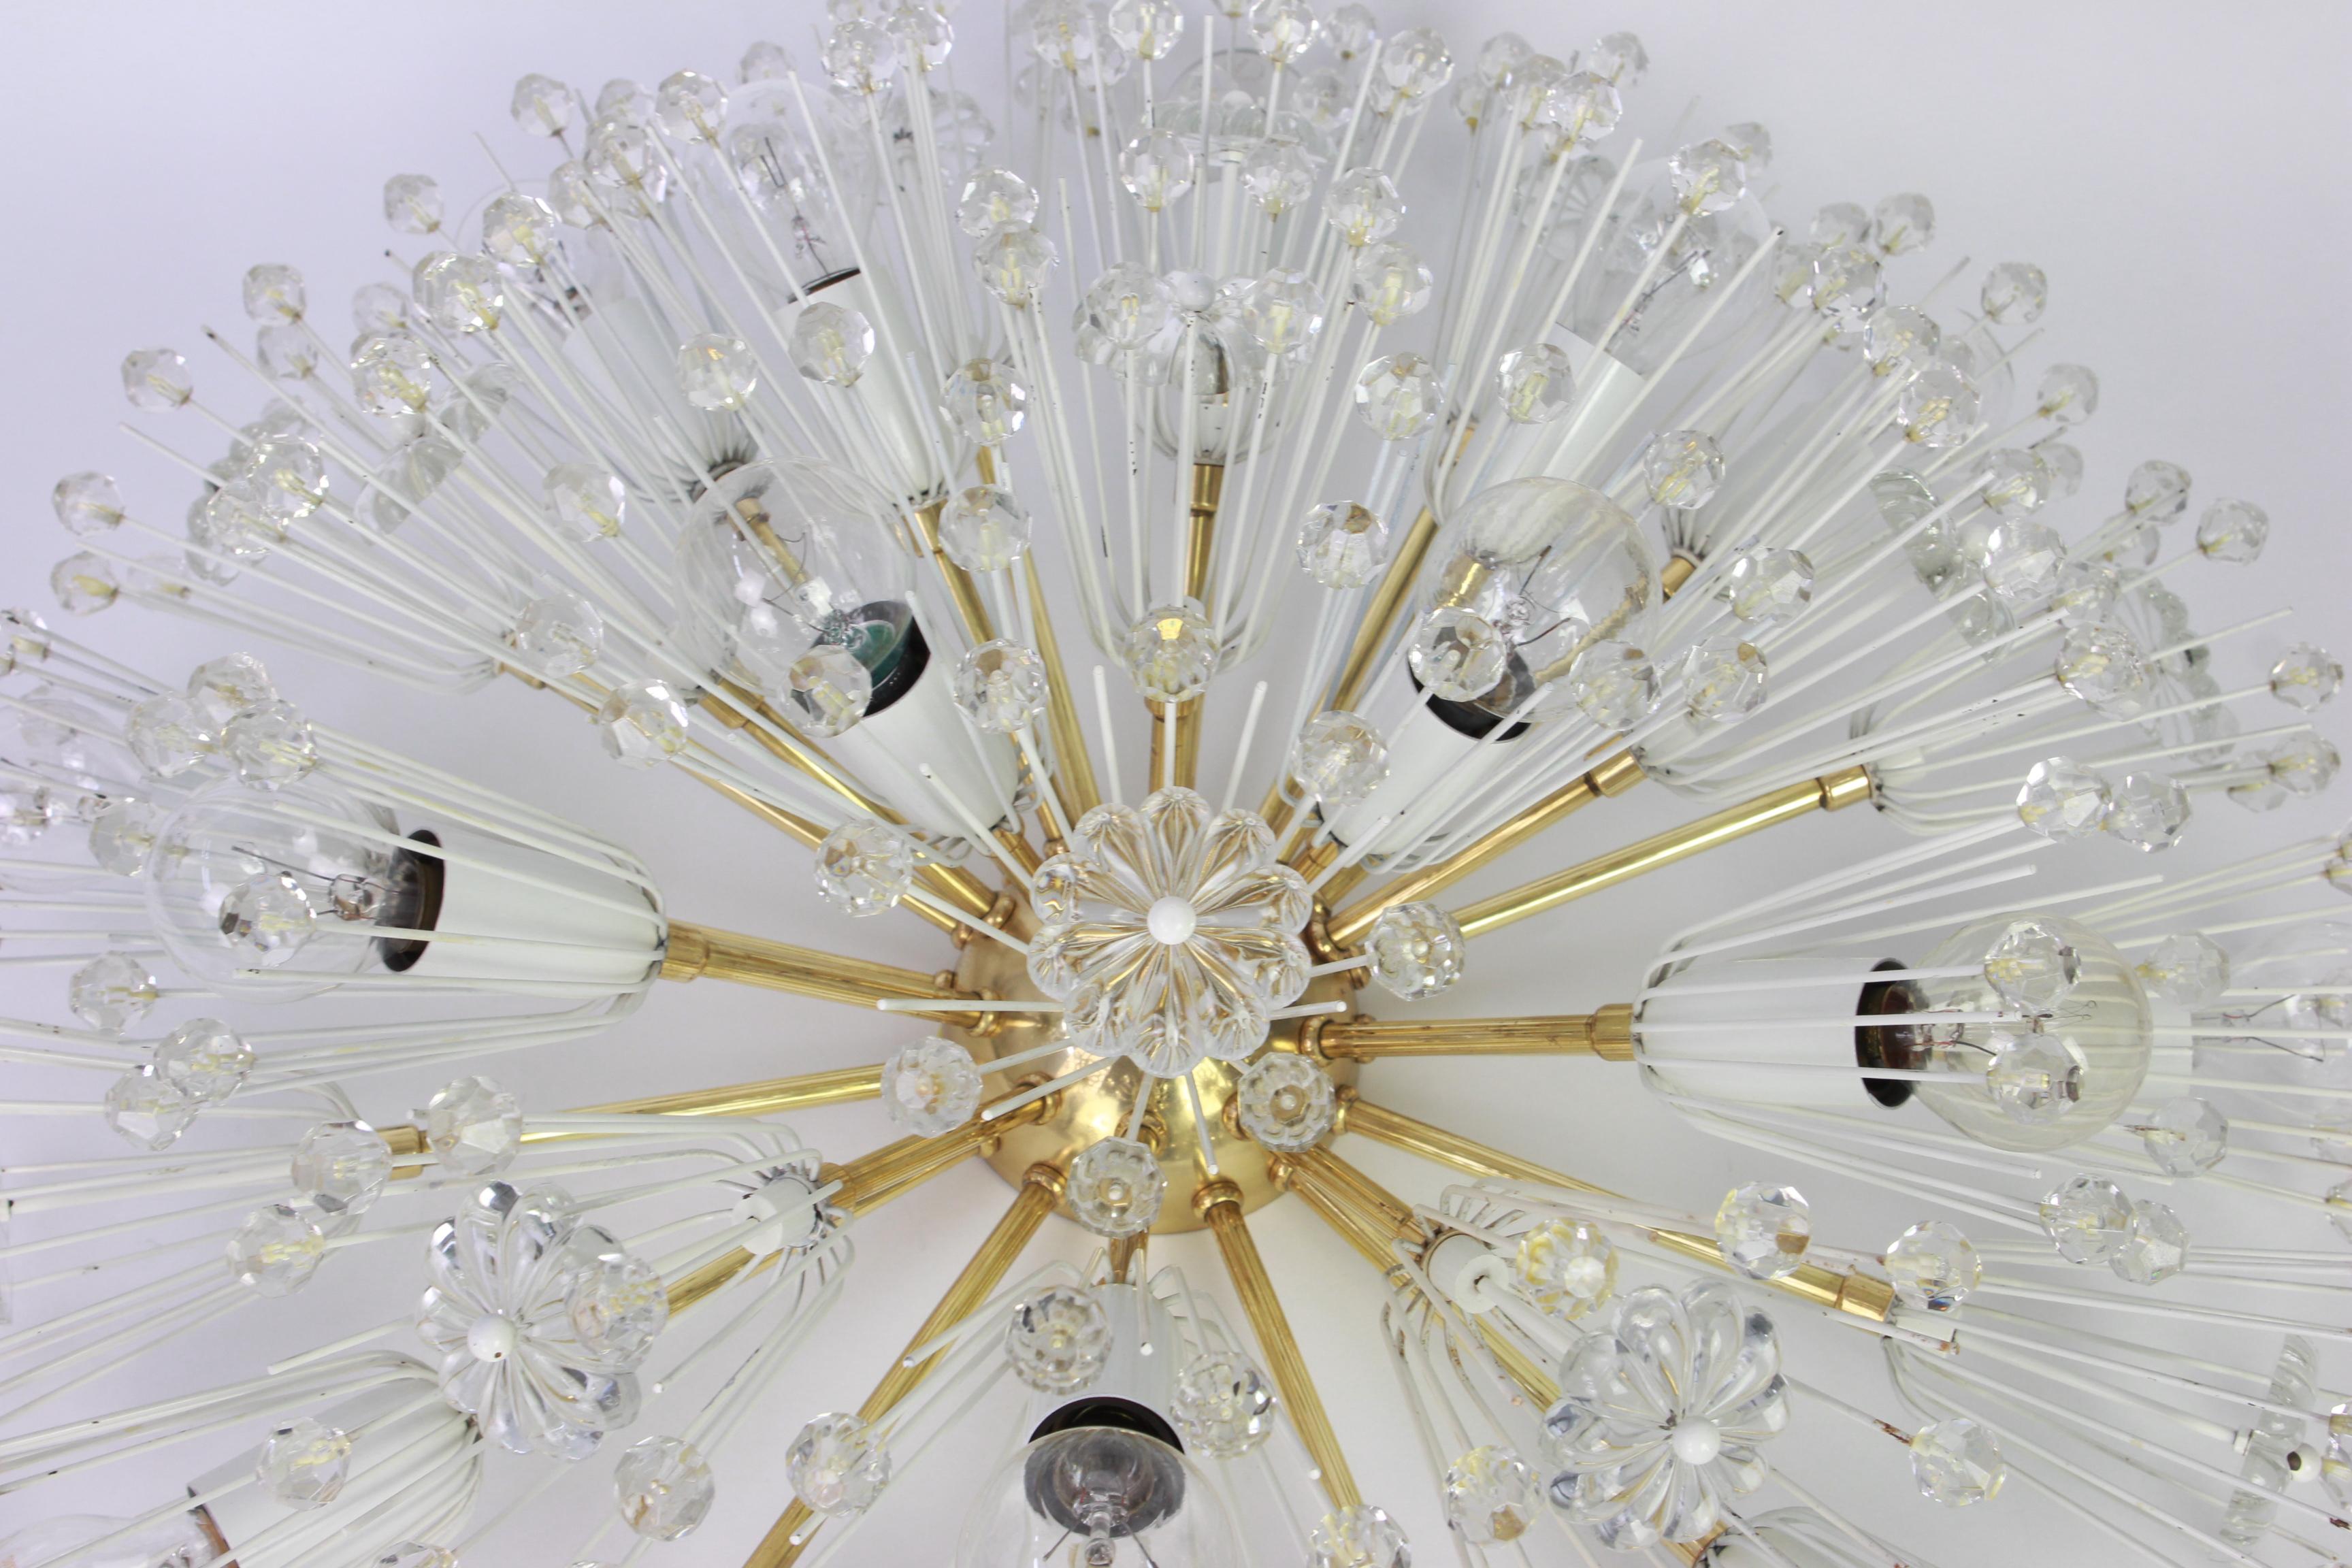 Beautiful large starburst brass flush mount with hundreds of crystals designed by Emil Stejnar for Nikoll, manufactured in Austria, circa 1960s.

Heavy quality and in good condition with small signs of age.
Cleaned, well-wired and ready to use. The